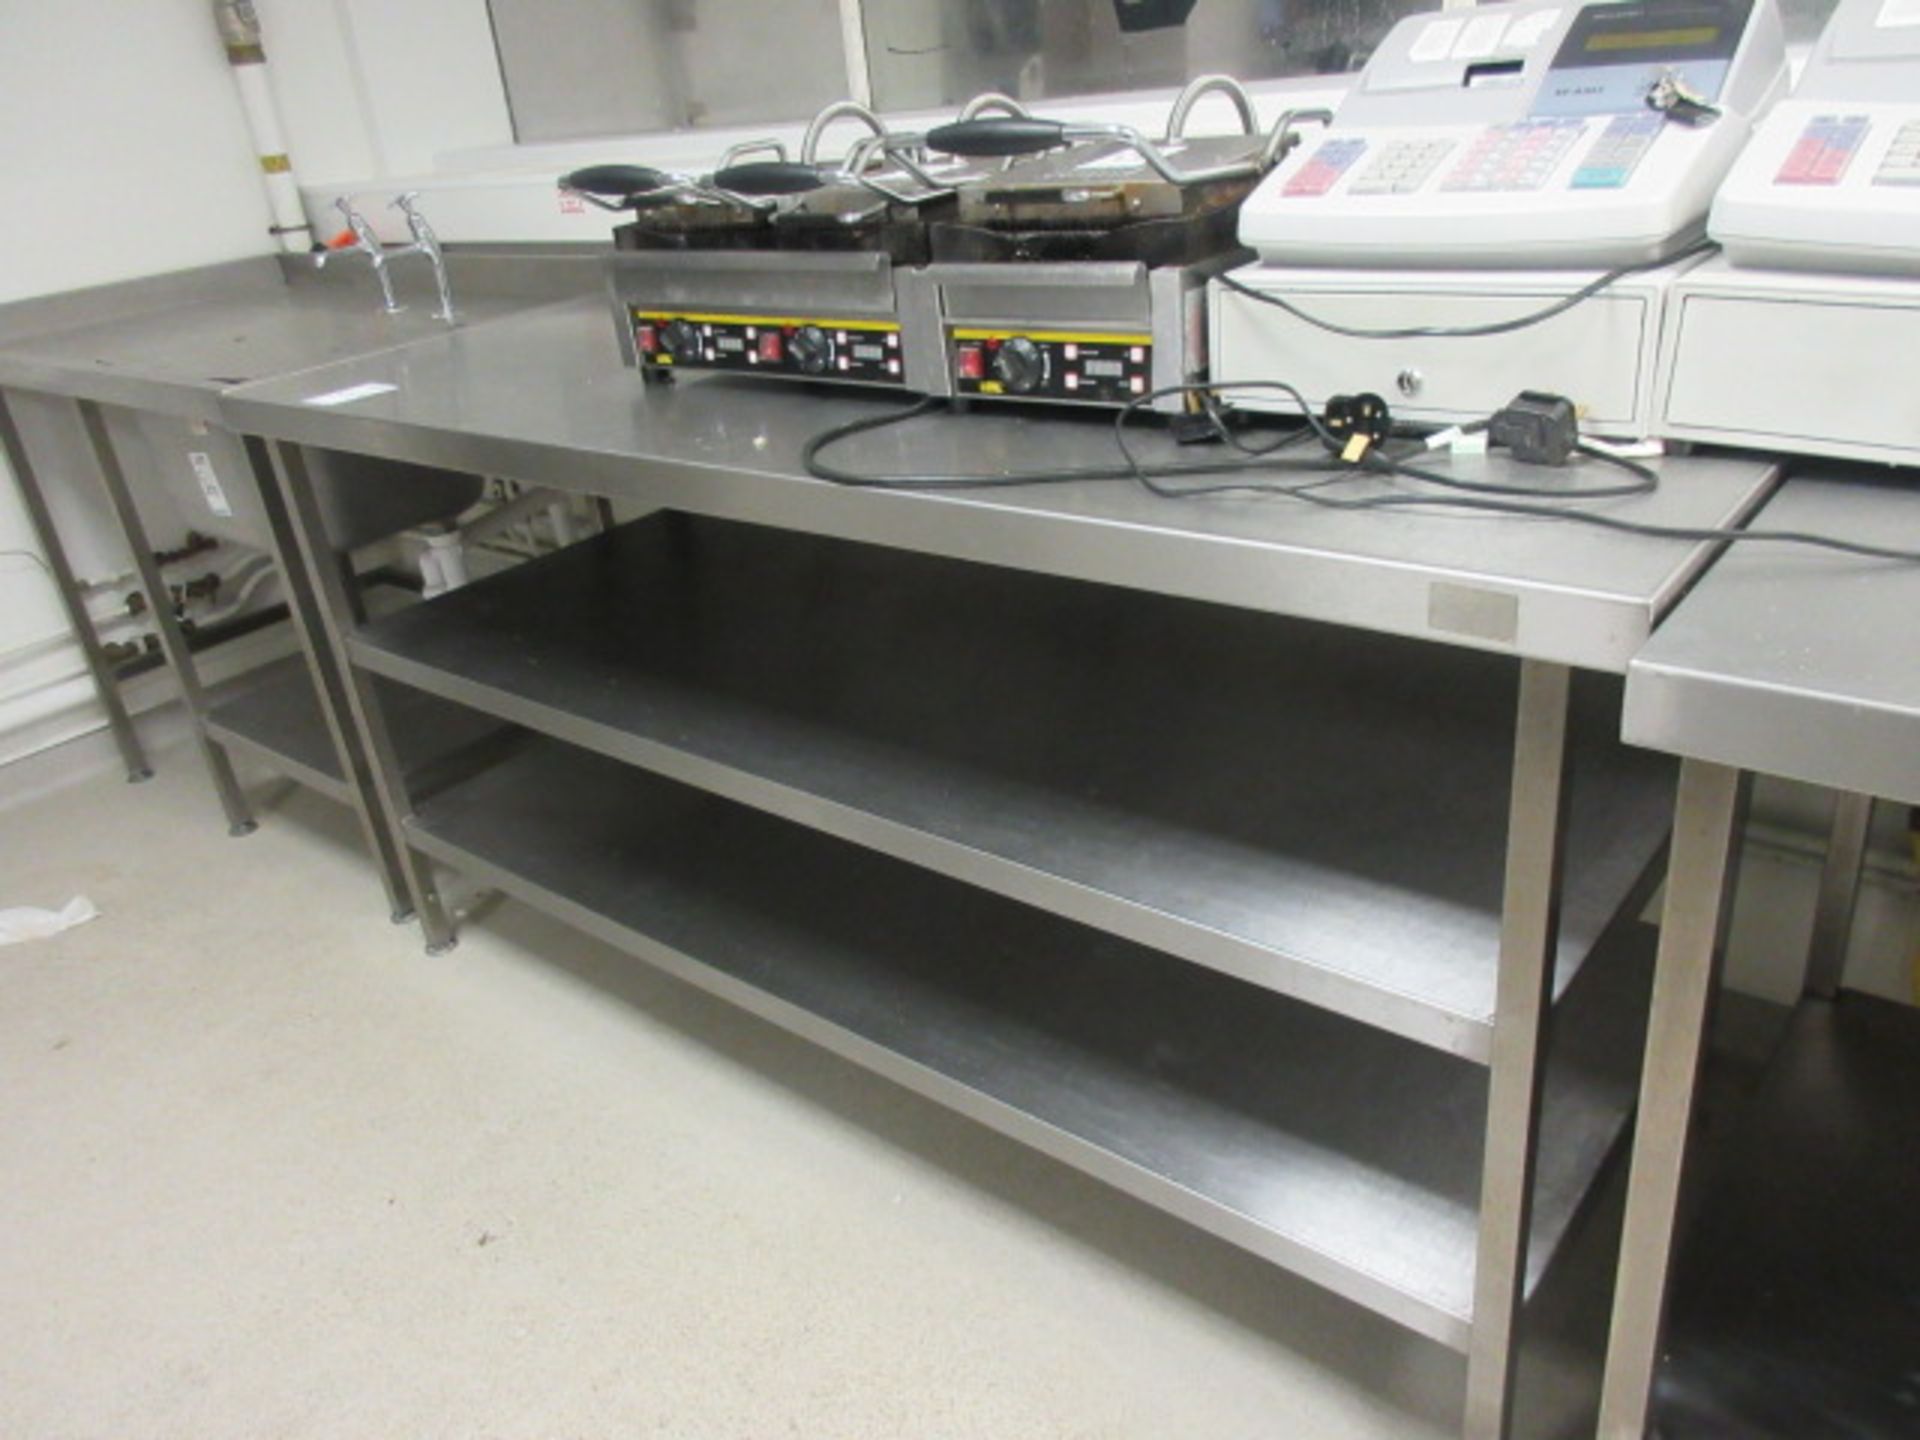 Stainless Steel Preparation Table with 2 shelves Holehouse Road Main Canteen Ground Floor